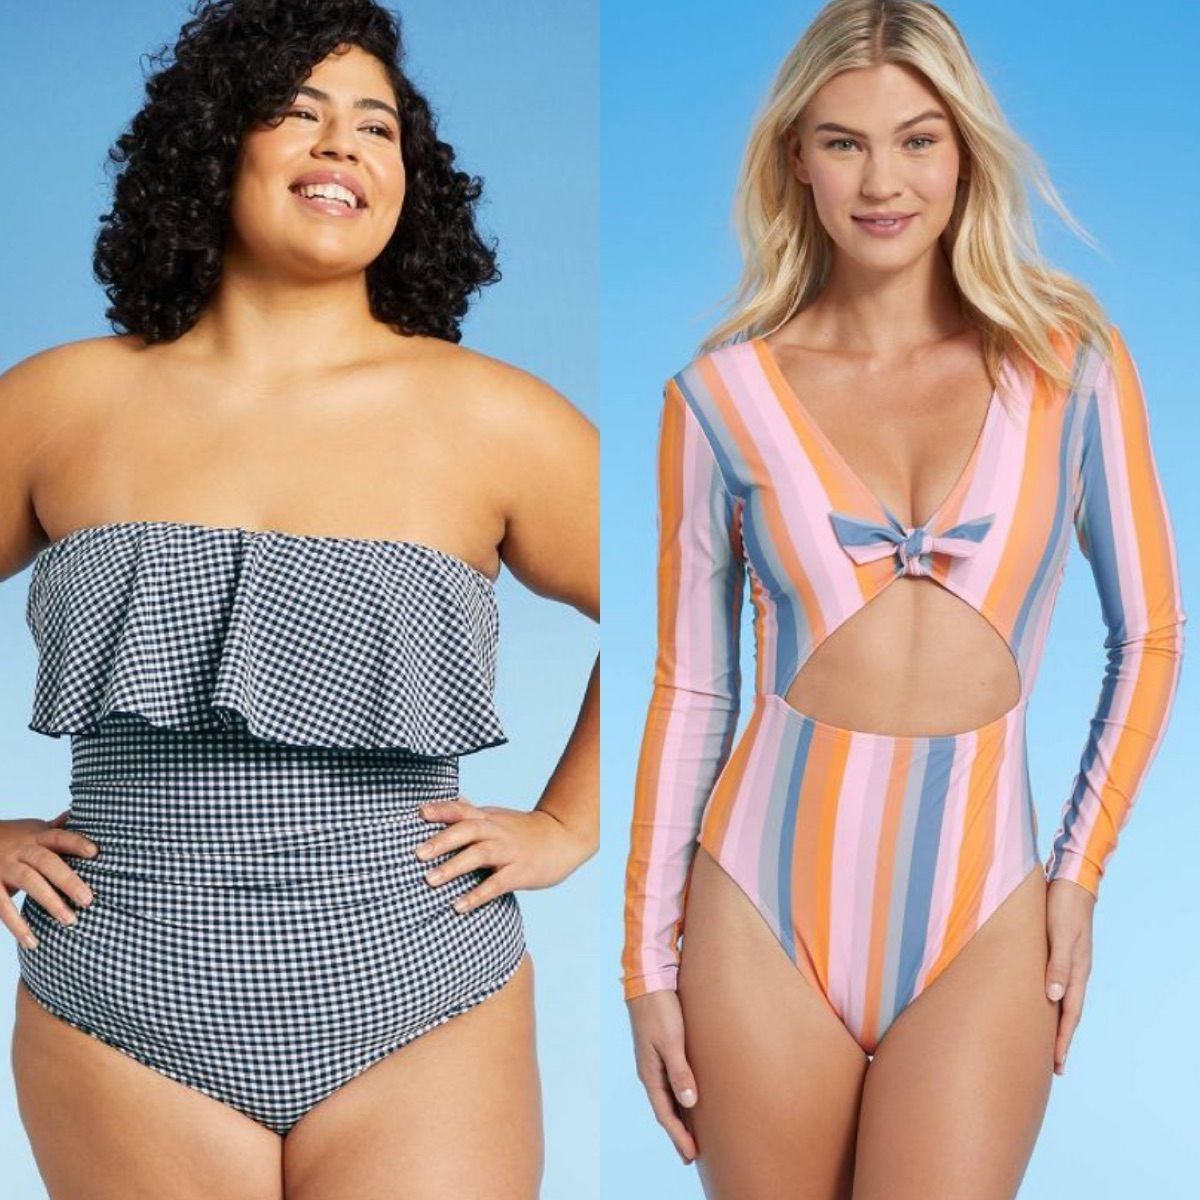 Swimsuits For All sale: Swimsuit has hundreds of 5-star reviews — and it's  more than 50% off